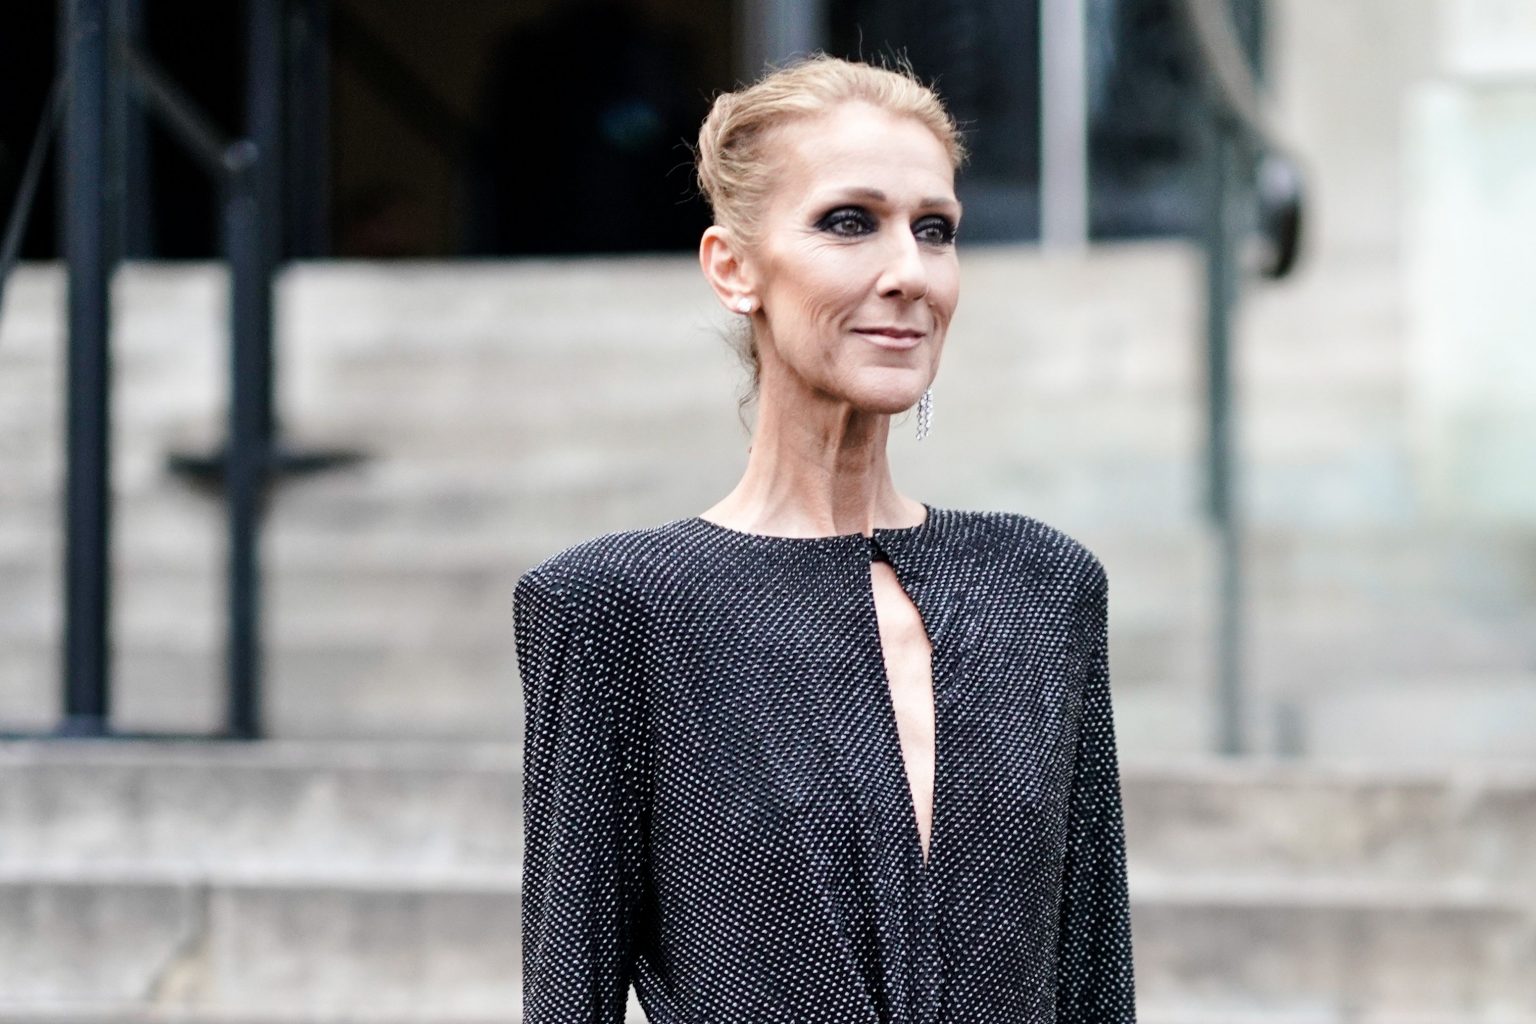 Celine Dion Health: What Is Celine Dion Suffering From? - ABTC